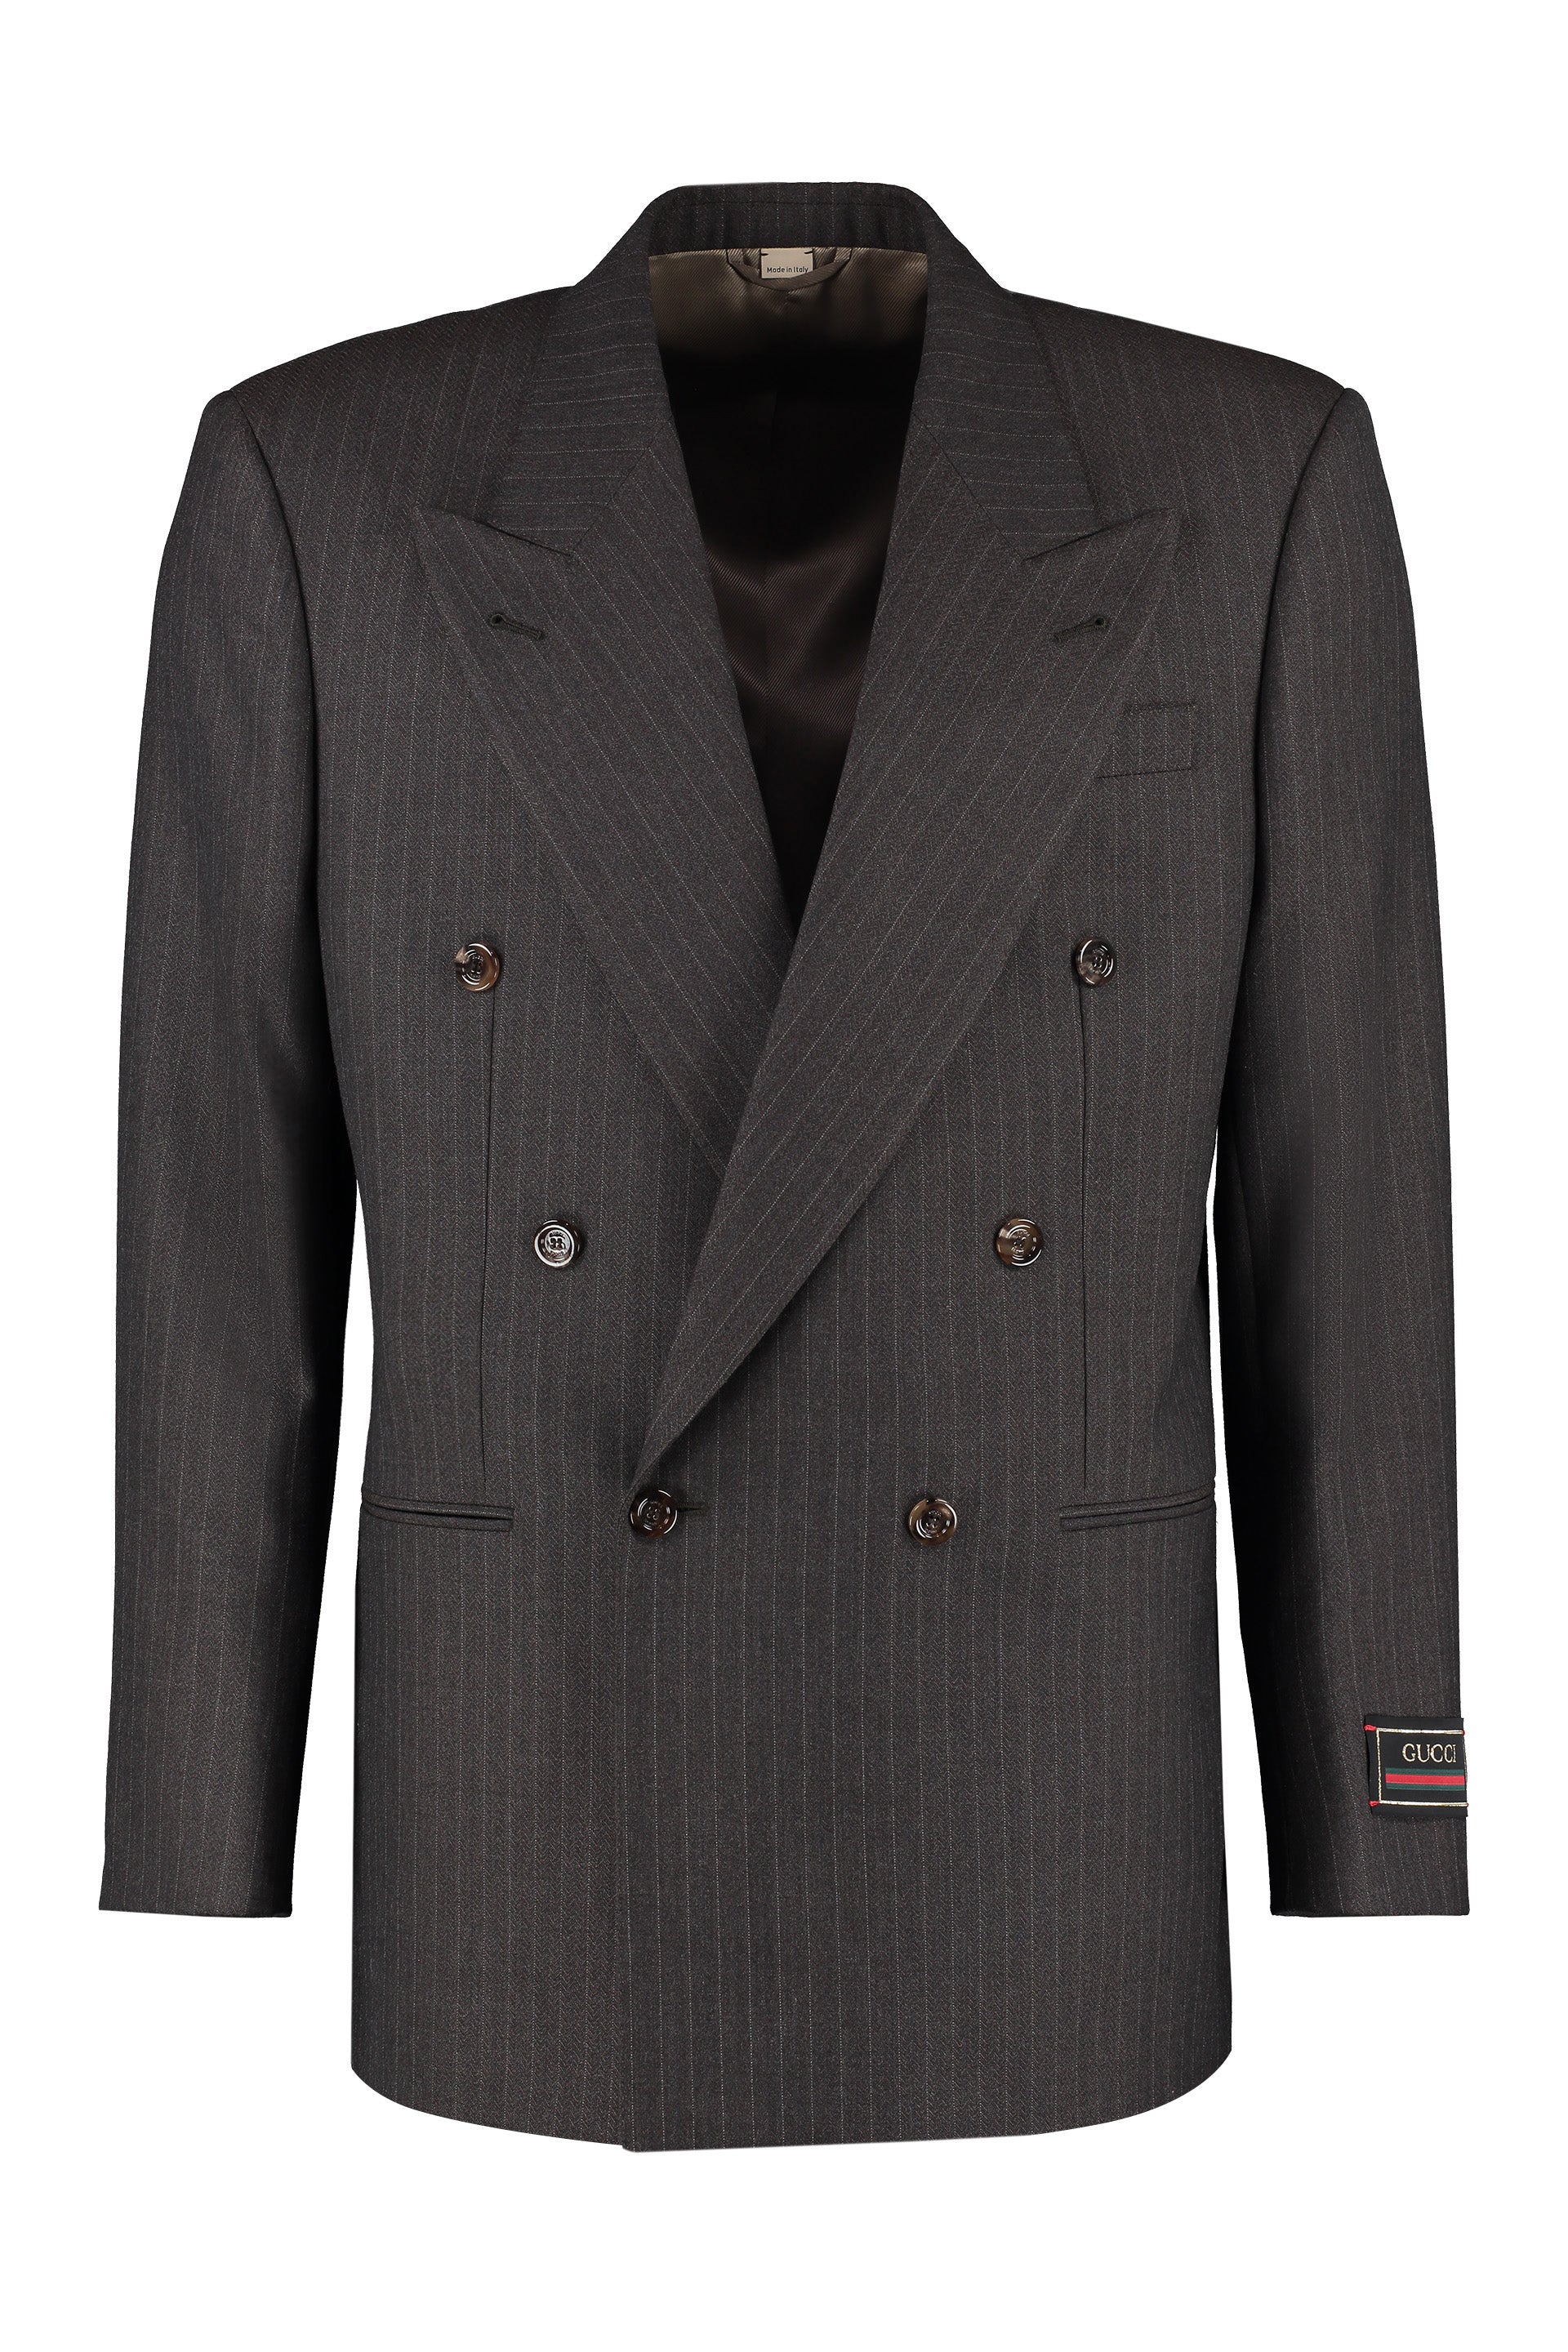 Gucci Double-breasted Wool Jacket With Peak Lapel Collar And Padded Shoulders For Men In Gray